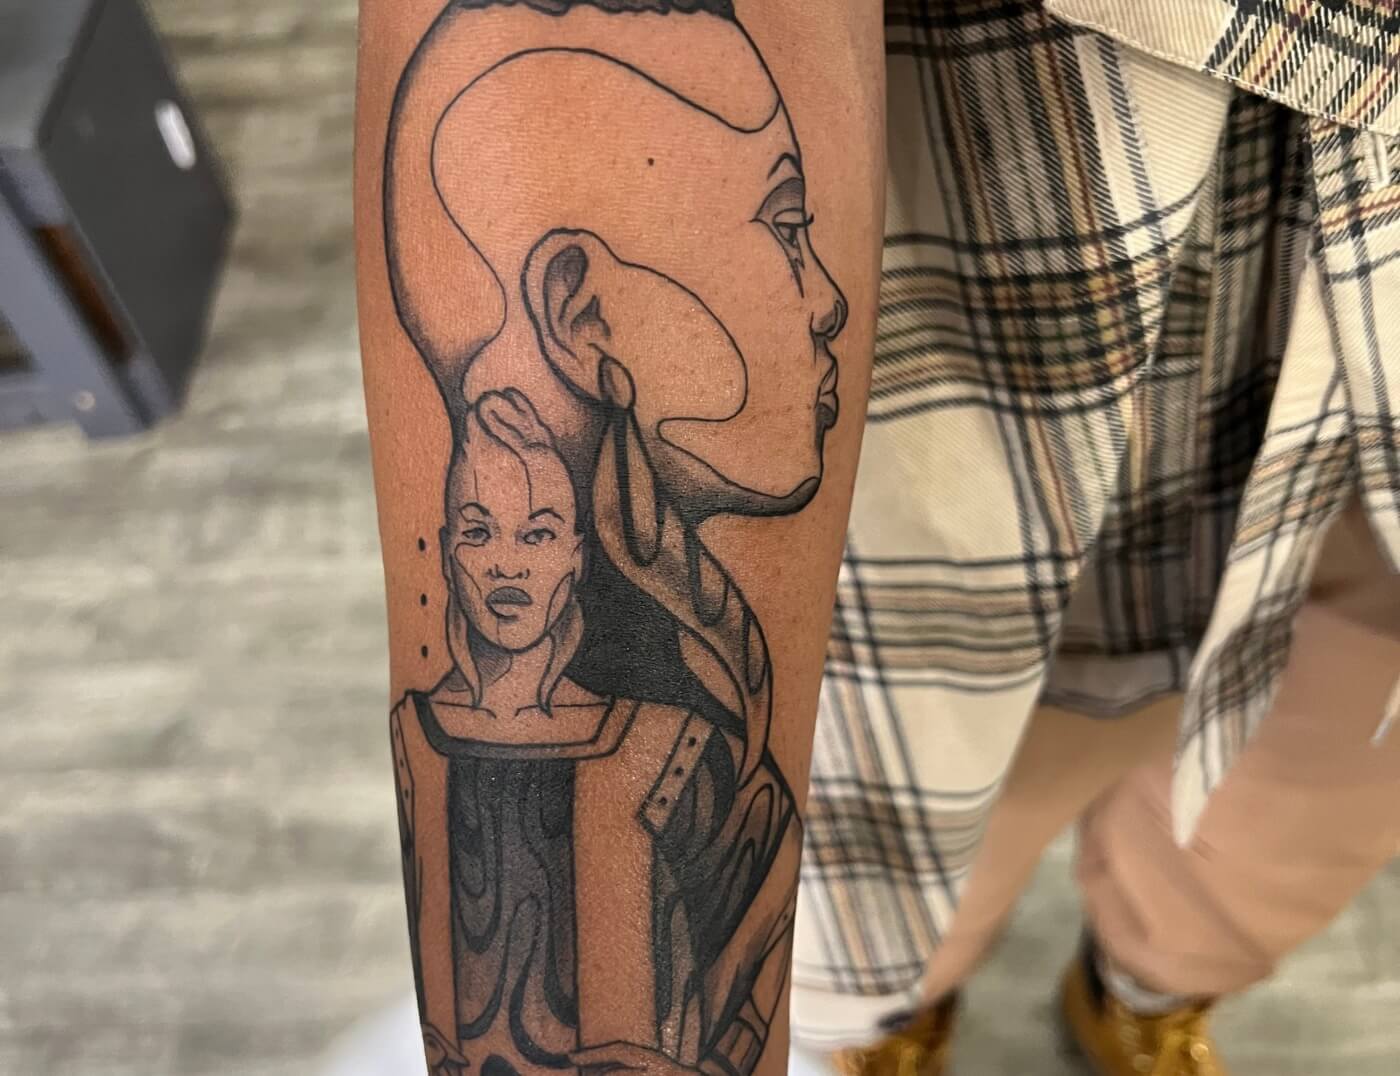 "Judah" Memorial Portrait Tattoo In Black & Grey By Funk Tha World At Iron Palm Tattoos In Atlanta Georgia. This piece was made especially to keep her sister close to her always. We're open late night until 2AM. Call 404-973-7828 or stop by for a free consultation. Walk Ins are welcome.